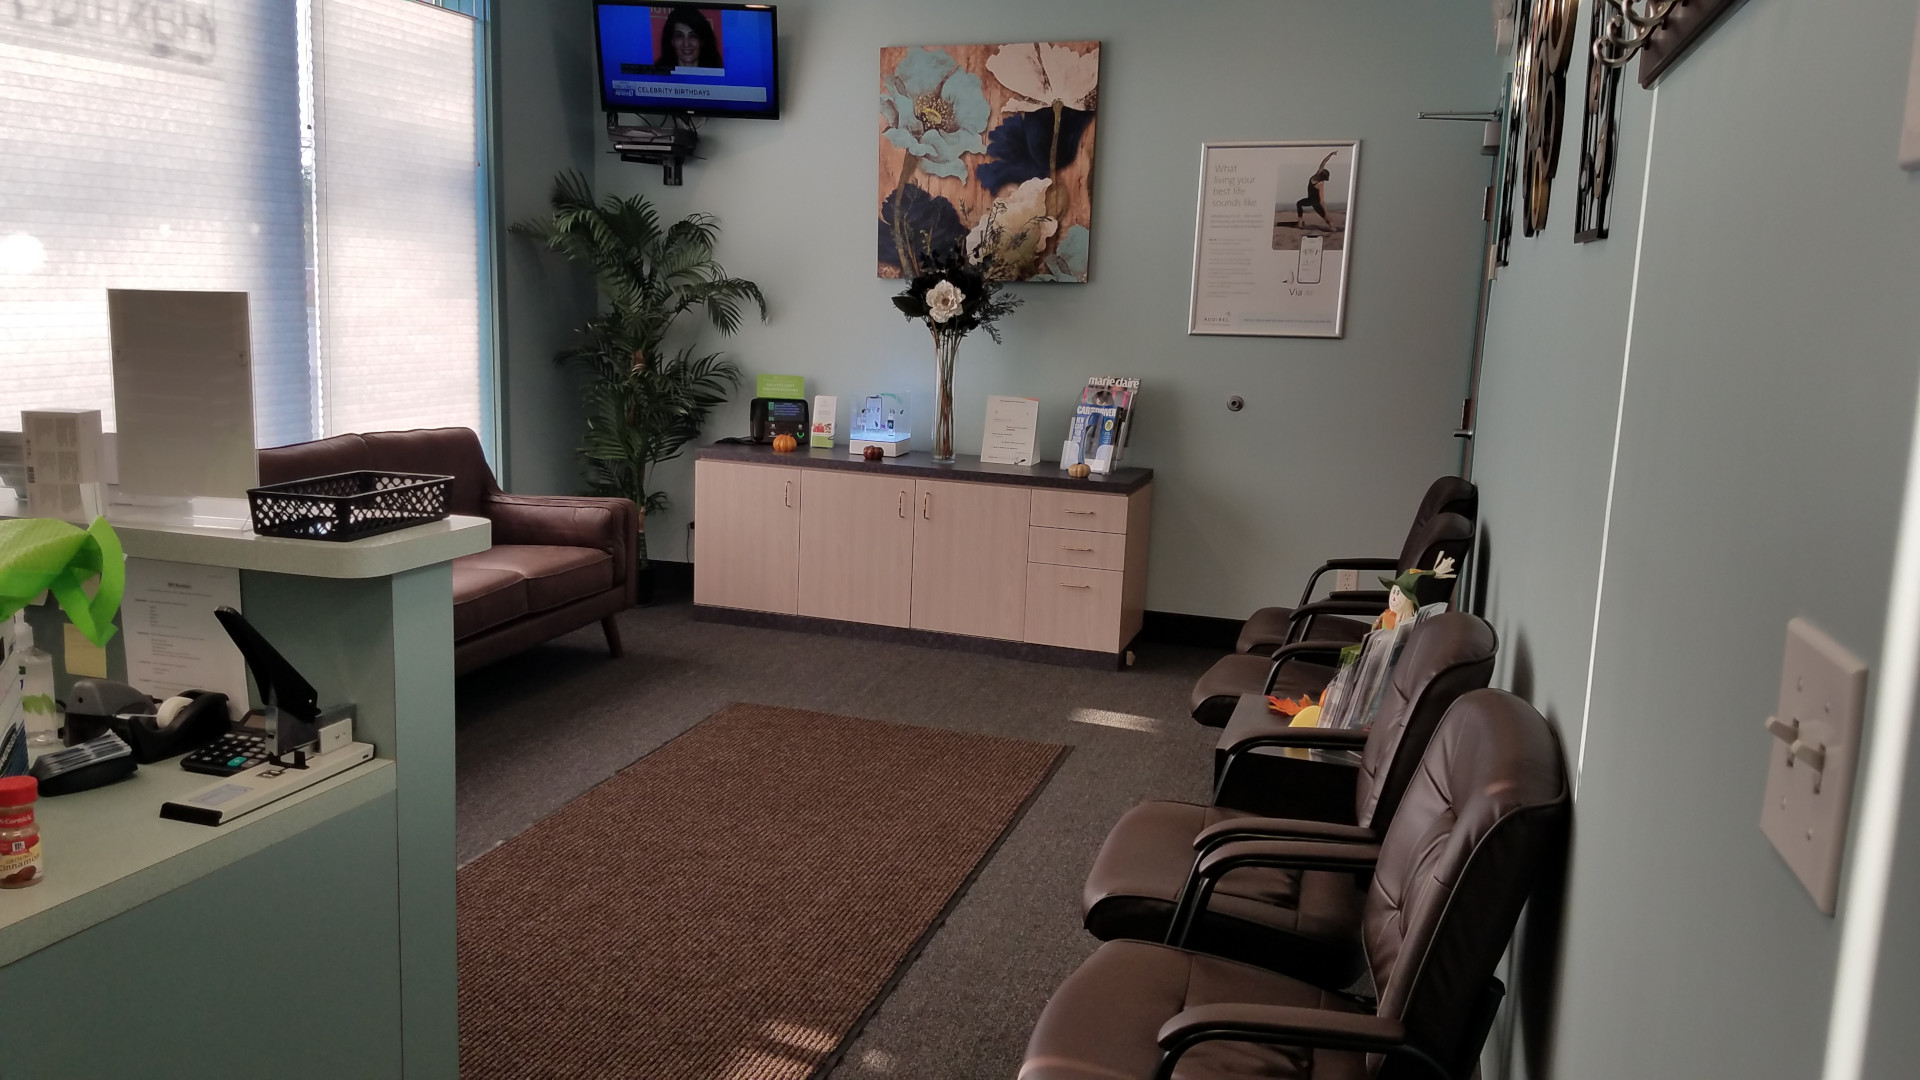 waiting room with small display on back wall along with chairs and tv